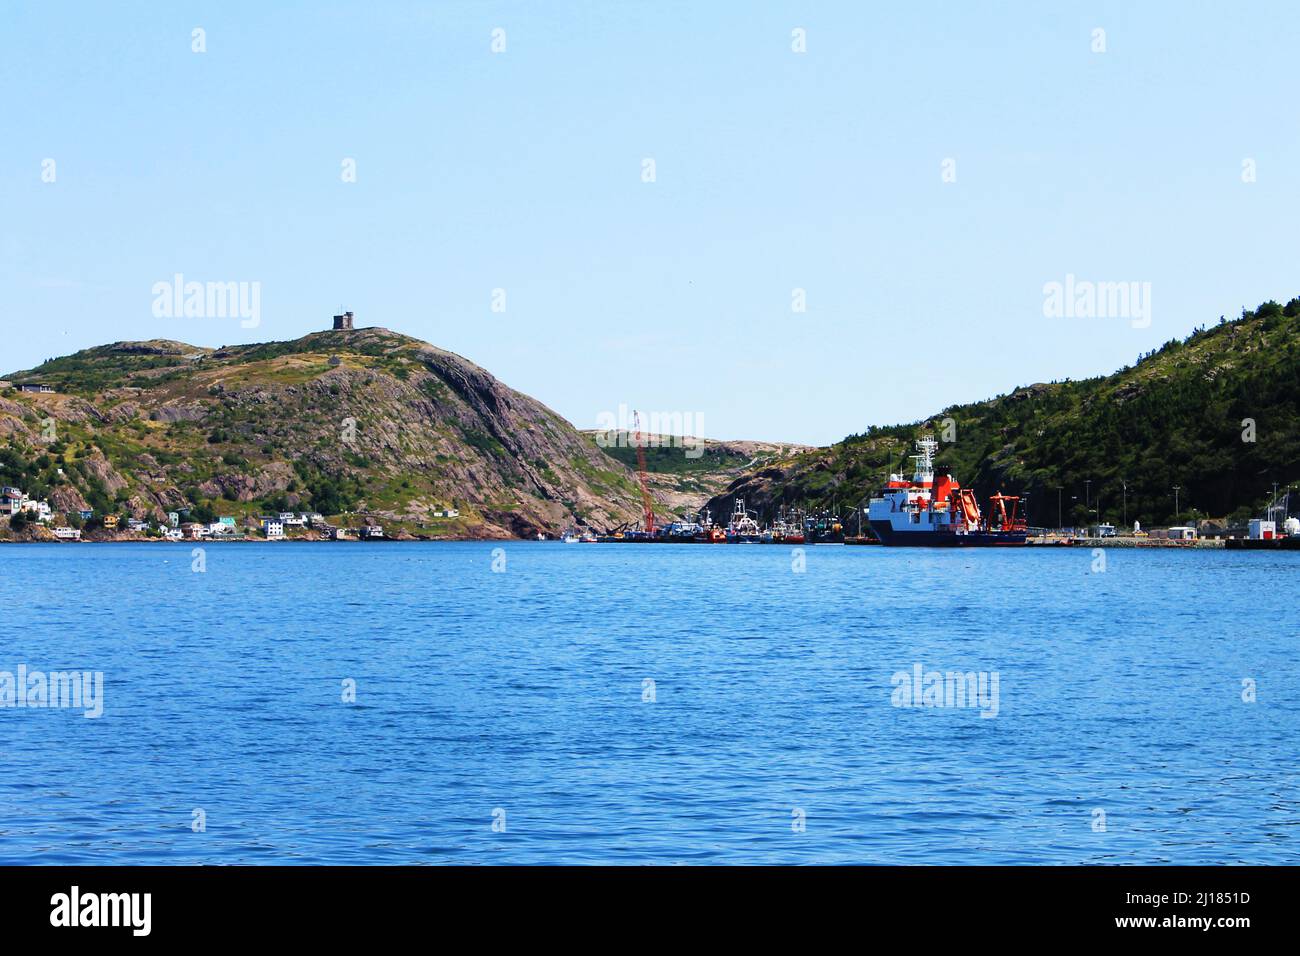 Looking across St. John's Harbour toward signal hill, with Cabot Tower. Stock Photo